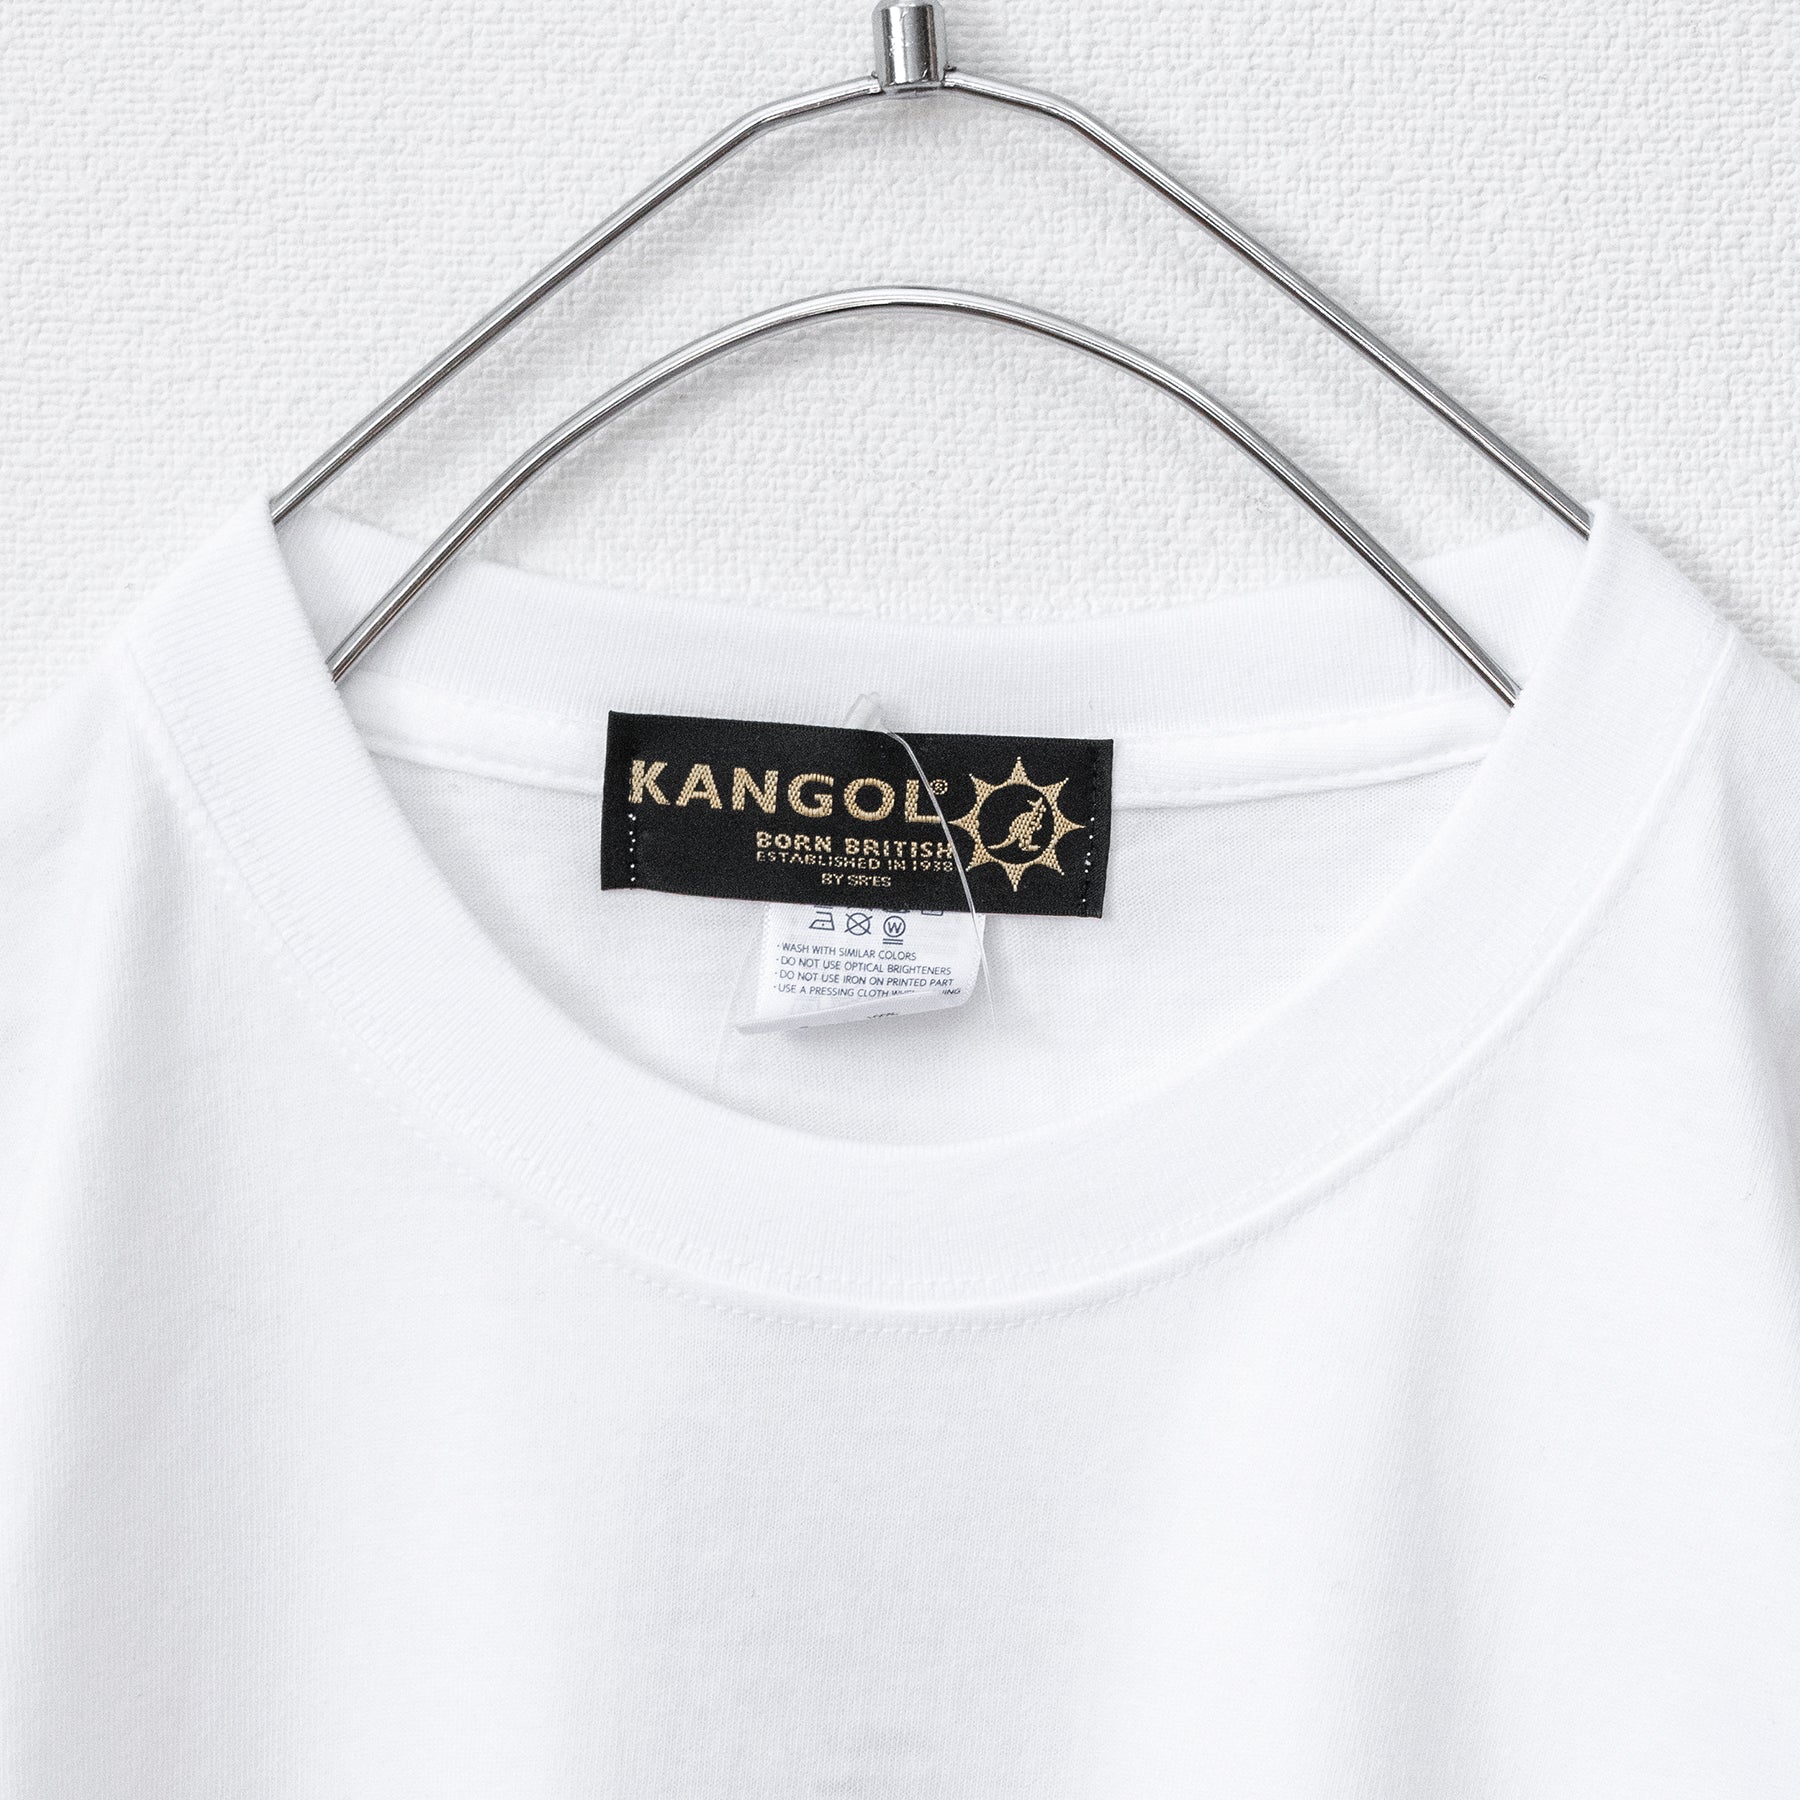 KANGOL NOISE ROCK S/S T-shirt (2 color) - YOUAREMYPOISON